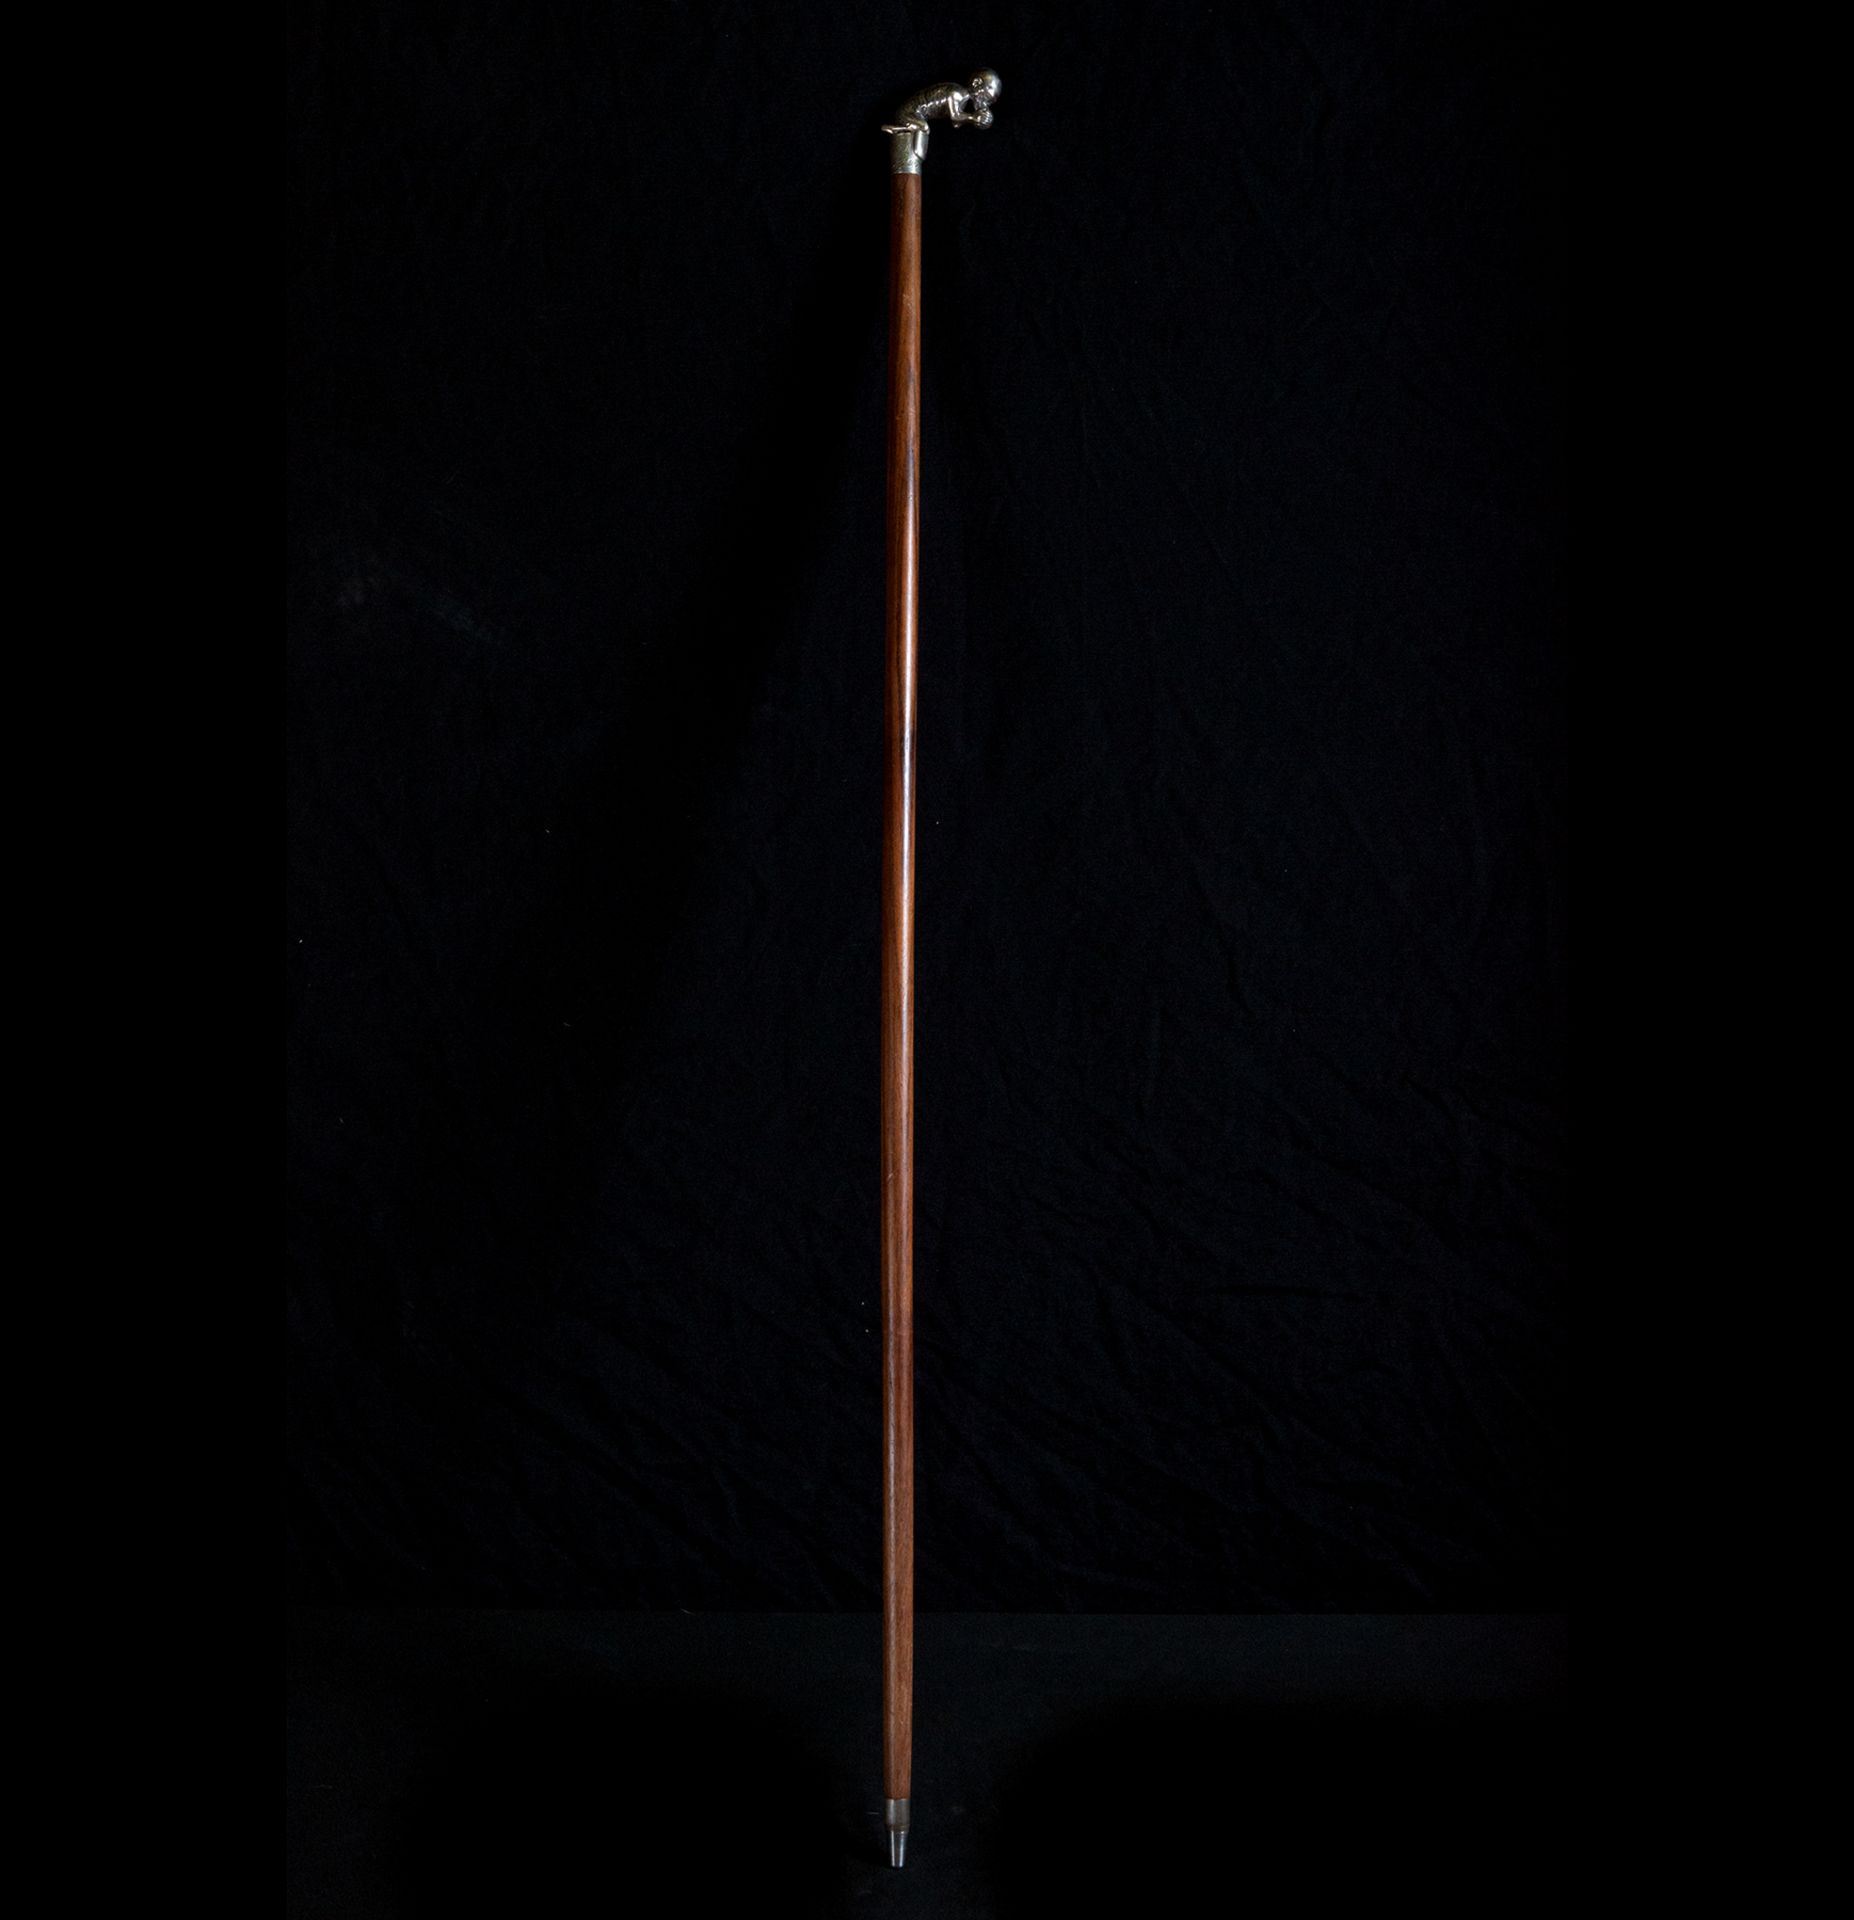 Colonial Jamaican walking stick with monkey handle and heraldic shield, 19th century - Image 2 of 4